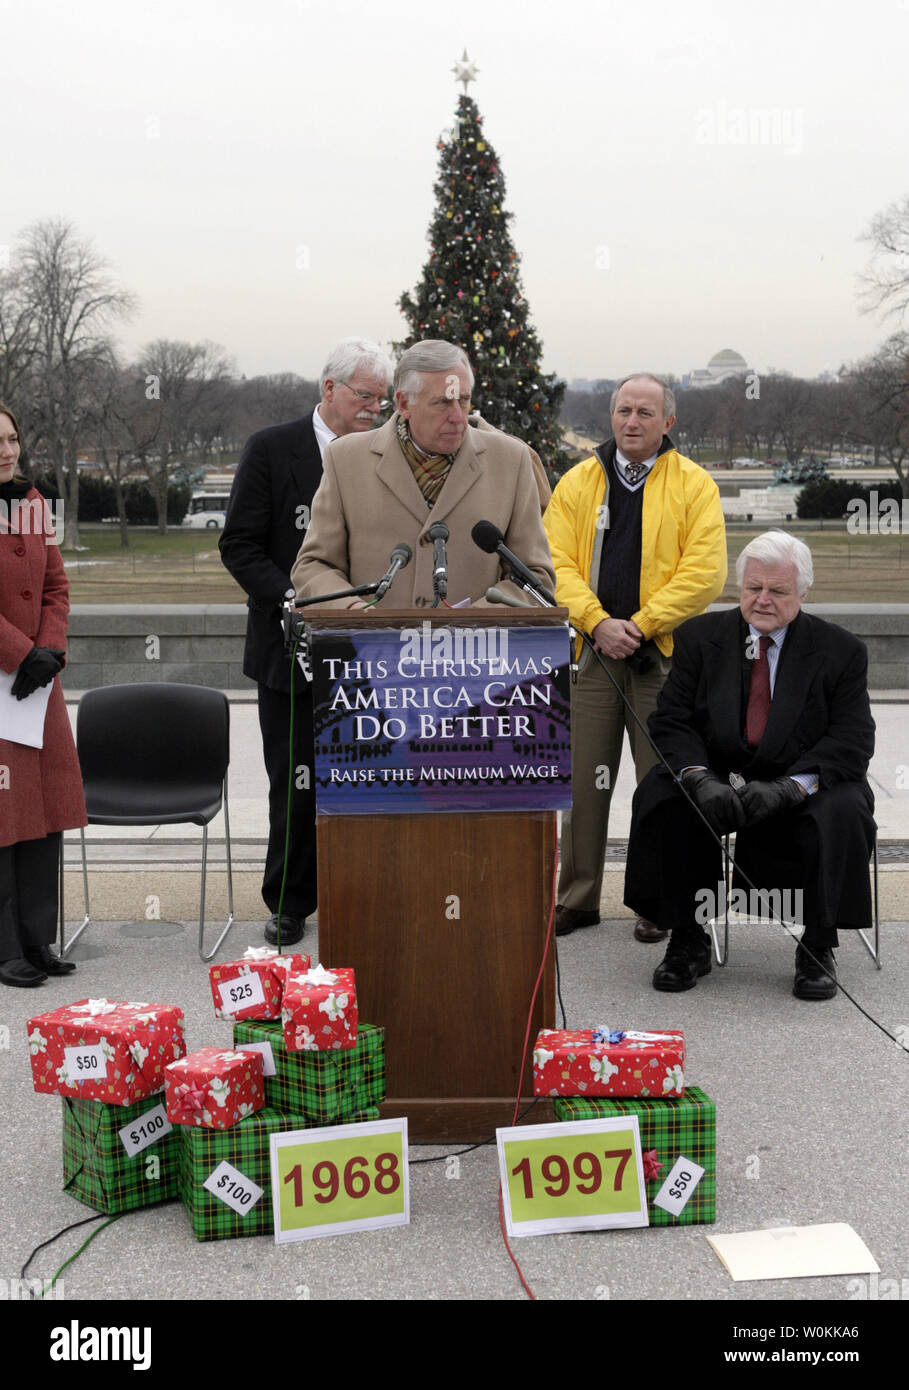 House Minority Whip Steny Hoyer, D-Md., center, speaks at a joint news conference with  Sen. Edward Kennedy, D-Mass., and Rep. George Miller, D-Calif., outside of the U.S. Capitol building in Washington, December 14, 2005. Senate and Congress democrats hold a news conference to discuss 'the true meaning of Christmas: hope, generosity, and goodwill toward others.' The lawmakers will call on Congress to raise the national minimum wage before leaving for the year and they will release a report from the Center for Economic and Policy Research detailing the 'difficulty that families living on the m Stock Photo